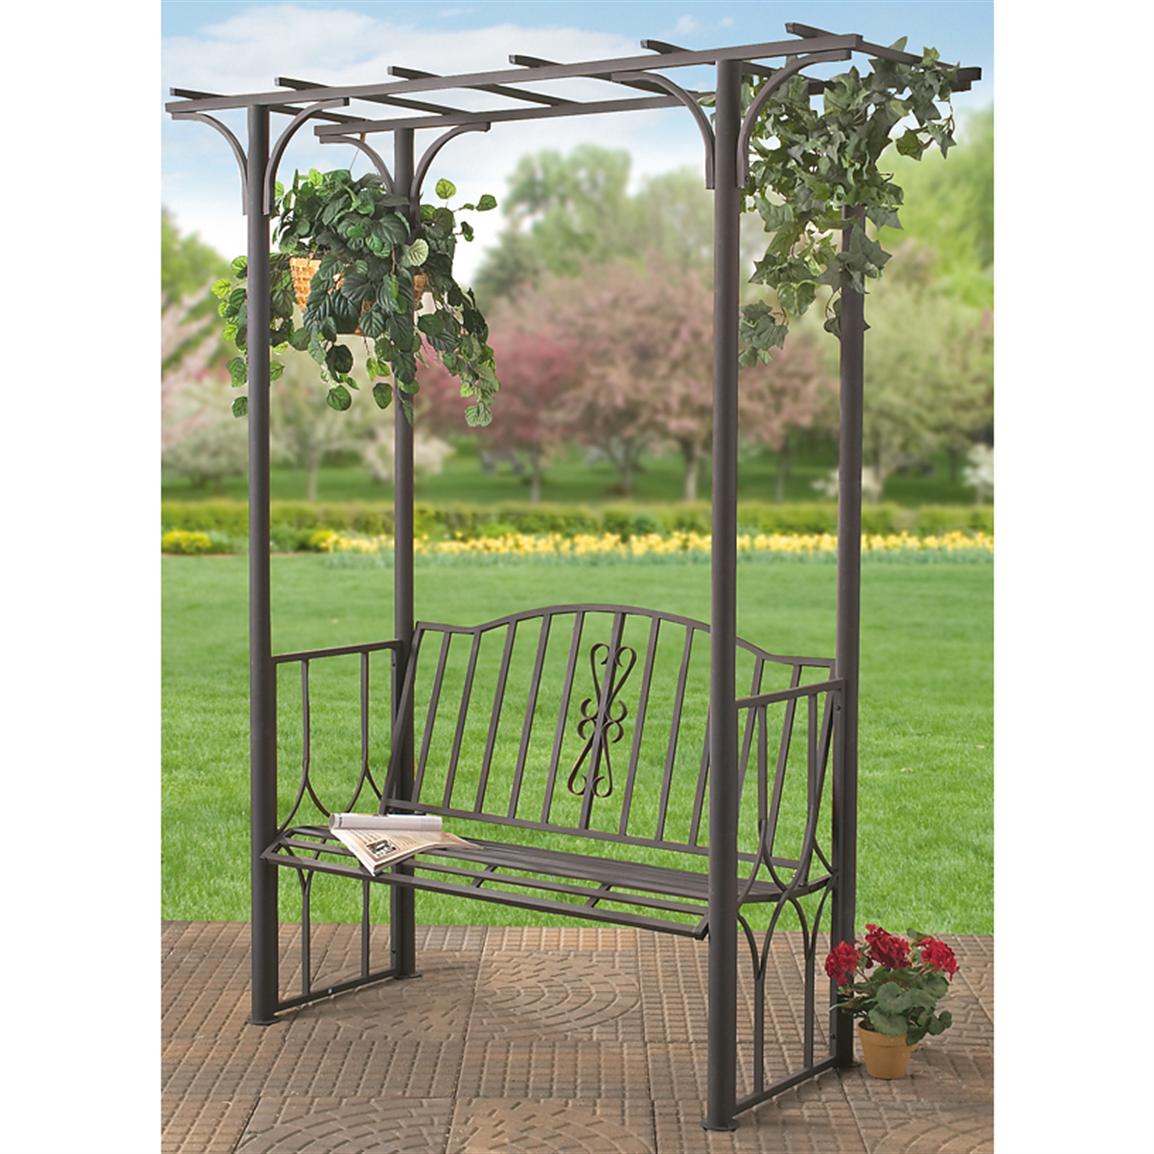 Backyard Arbor with Bench - 174113, Gazebos, Awnings & Canopies at